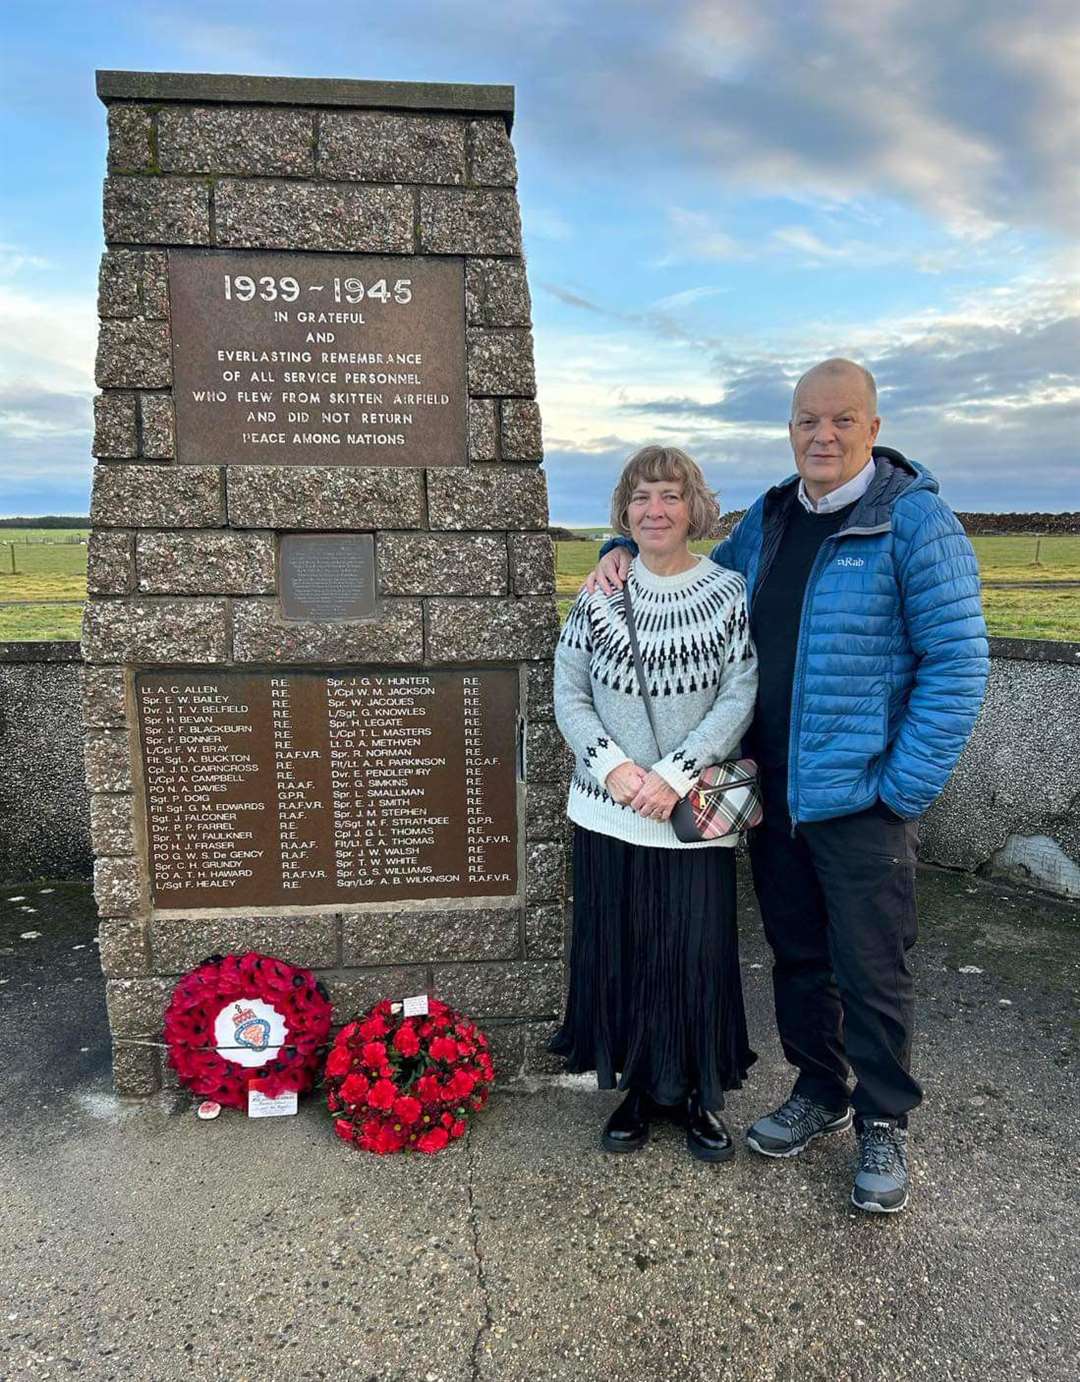 Military historian Bruce Tocher and his wife Joyce after laying a wreath at the Skitten airfield memorial on Sunday, the 81st anniversary of Operation Freshman.